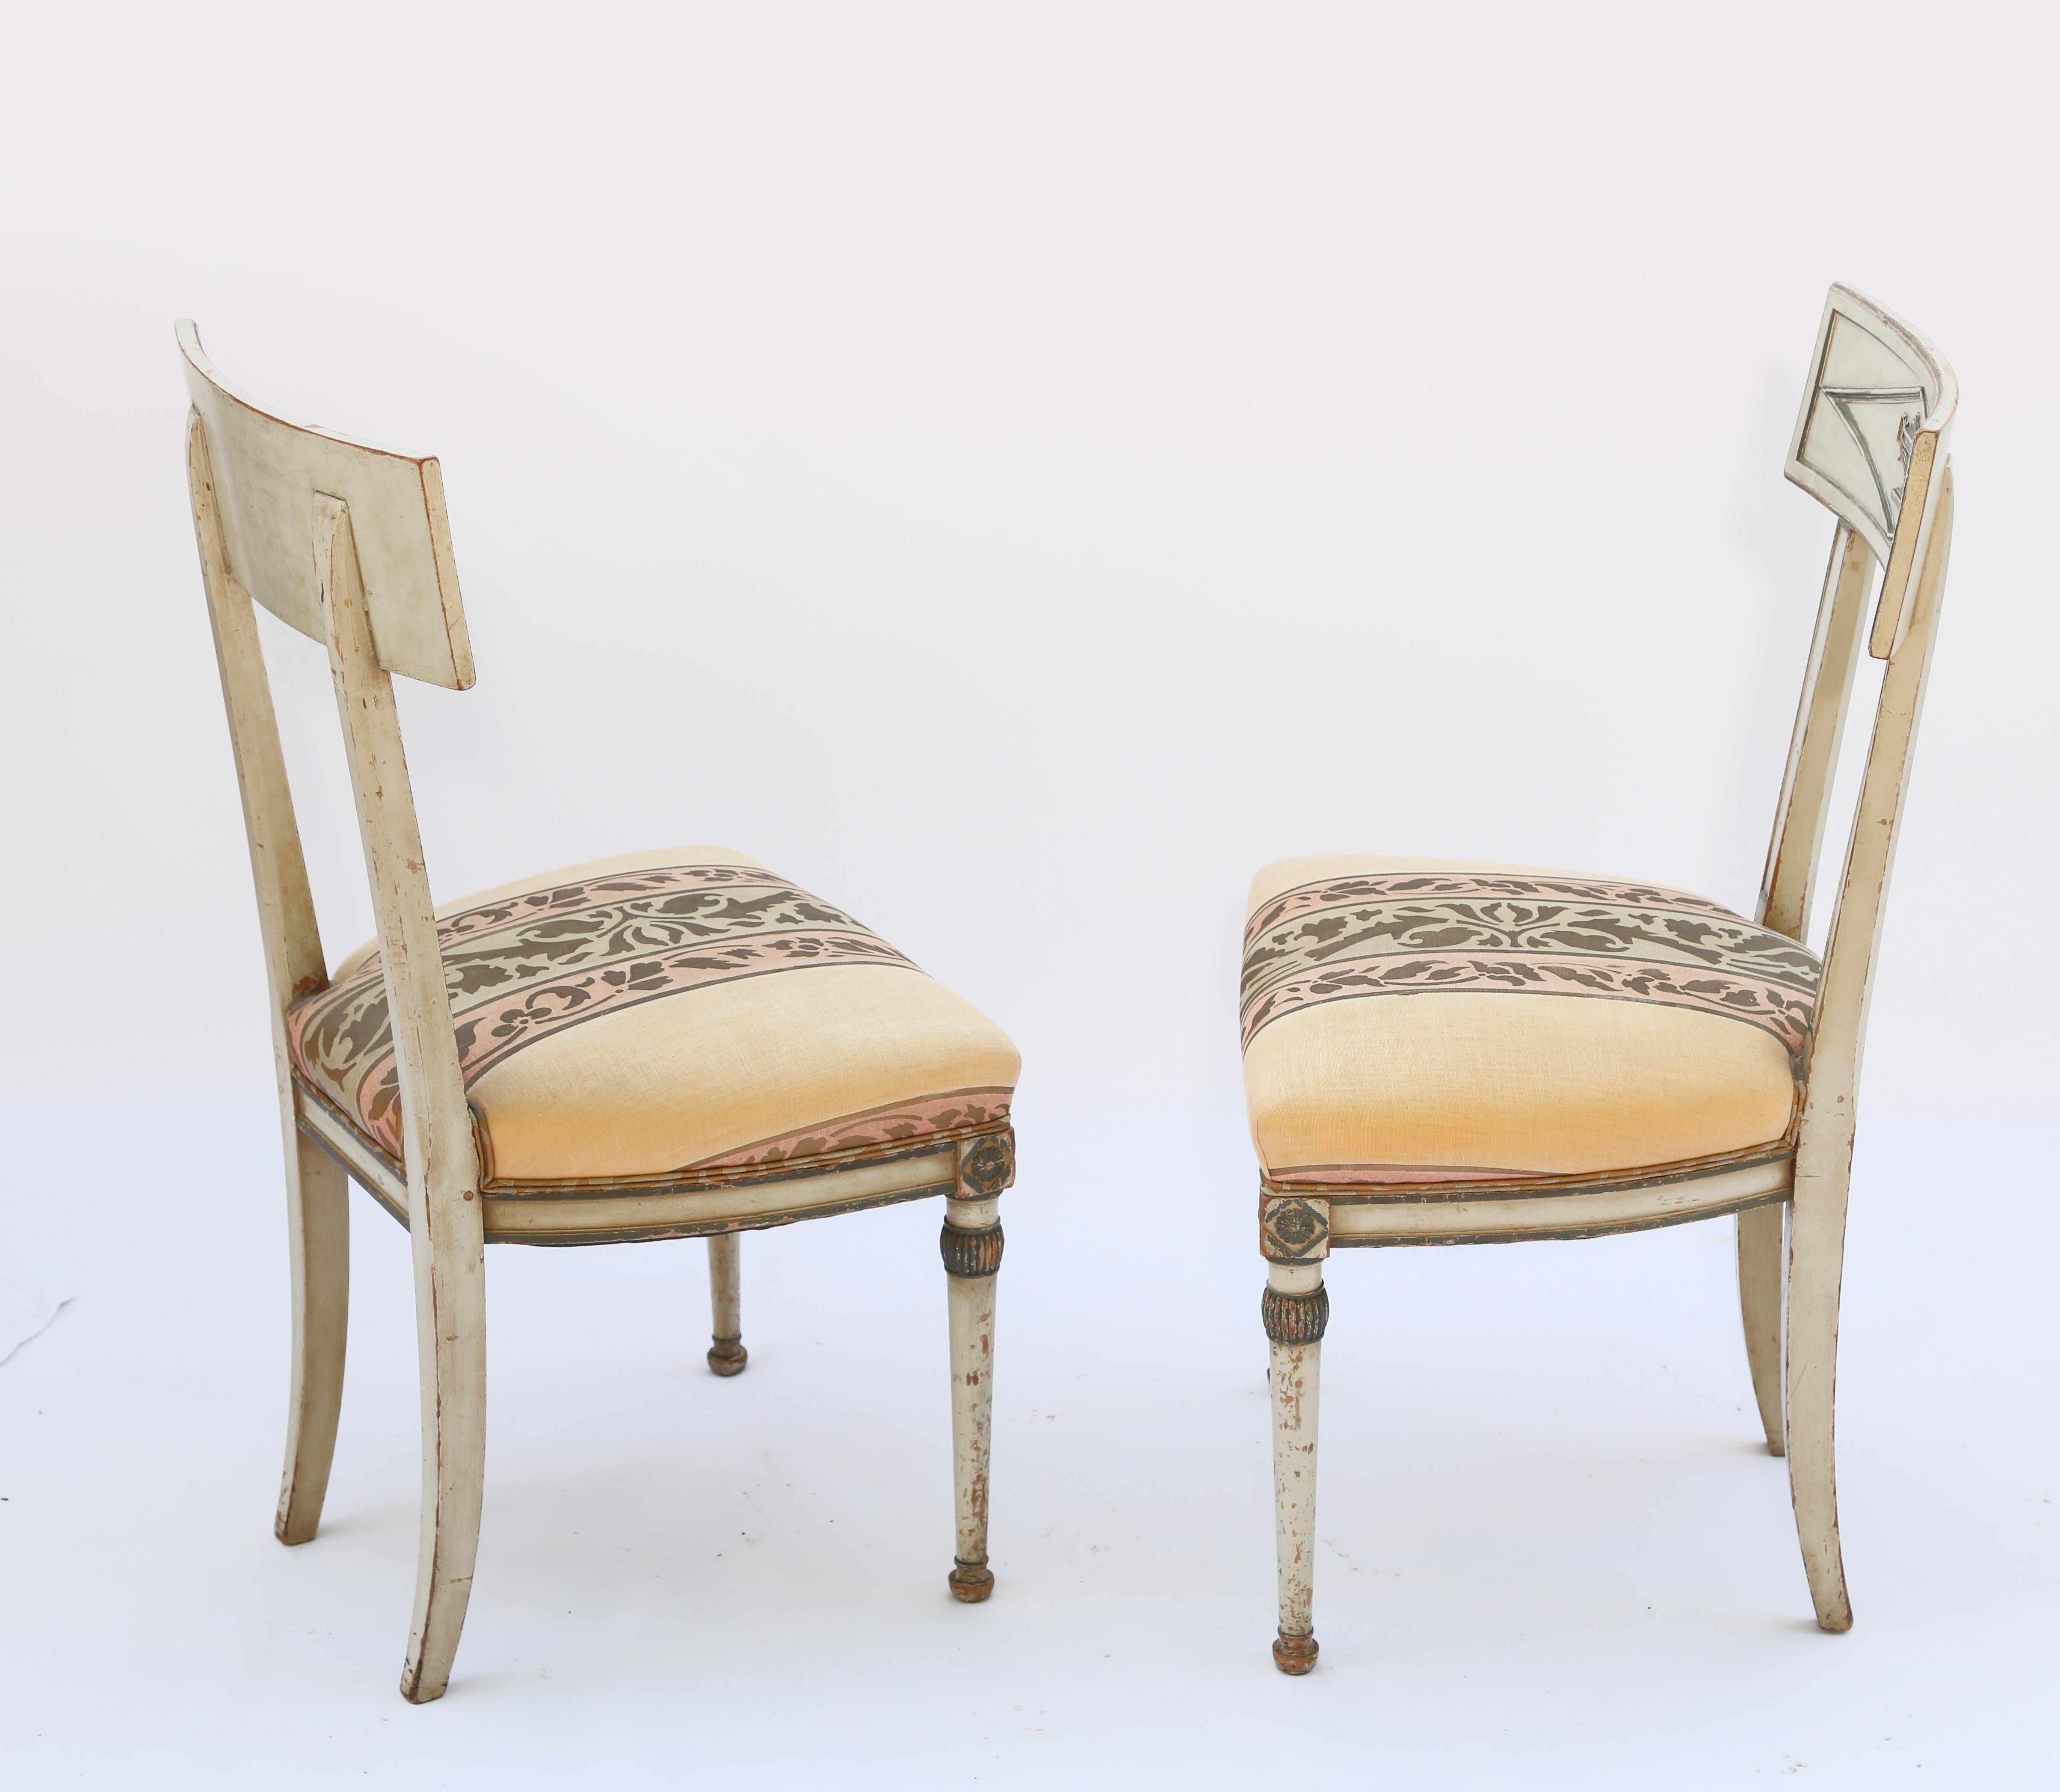 Pair of Late 18th/Early 19th Century, Painted Italian Neoclassical Side Chairs For Sale 3